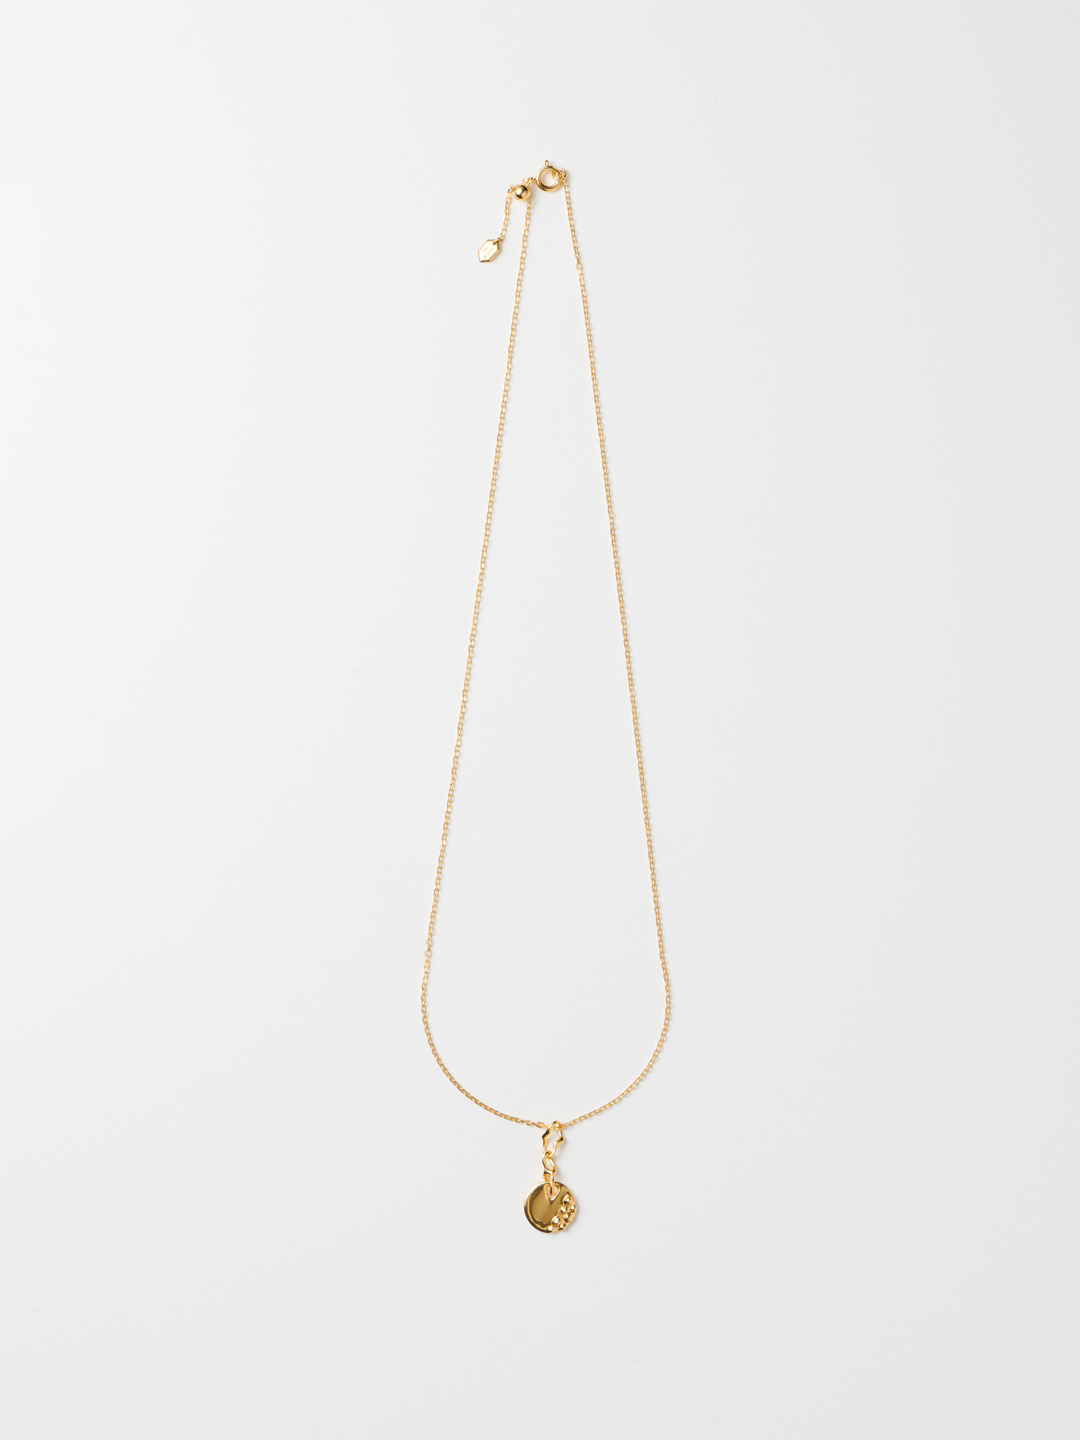 Blues Necklace - Yellow Gold